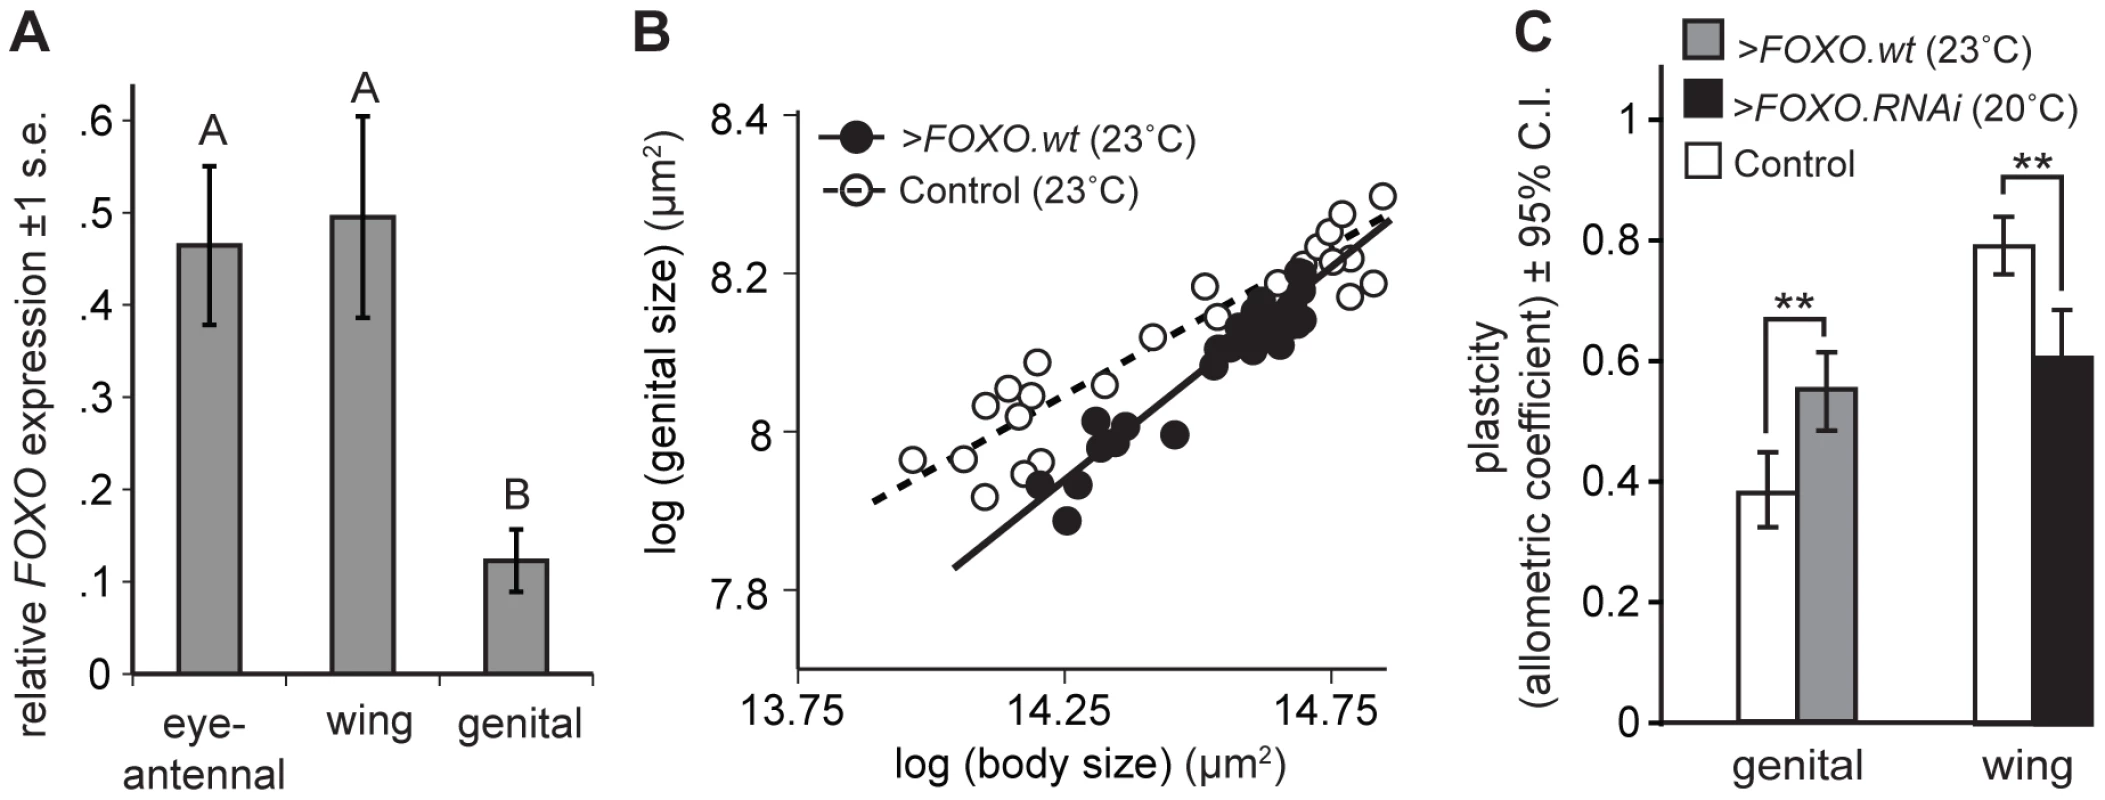 Organ-specific nutritional plasticity is regulated by differential expression of <i>FOXO</i>.